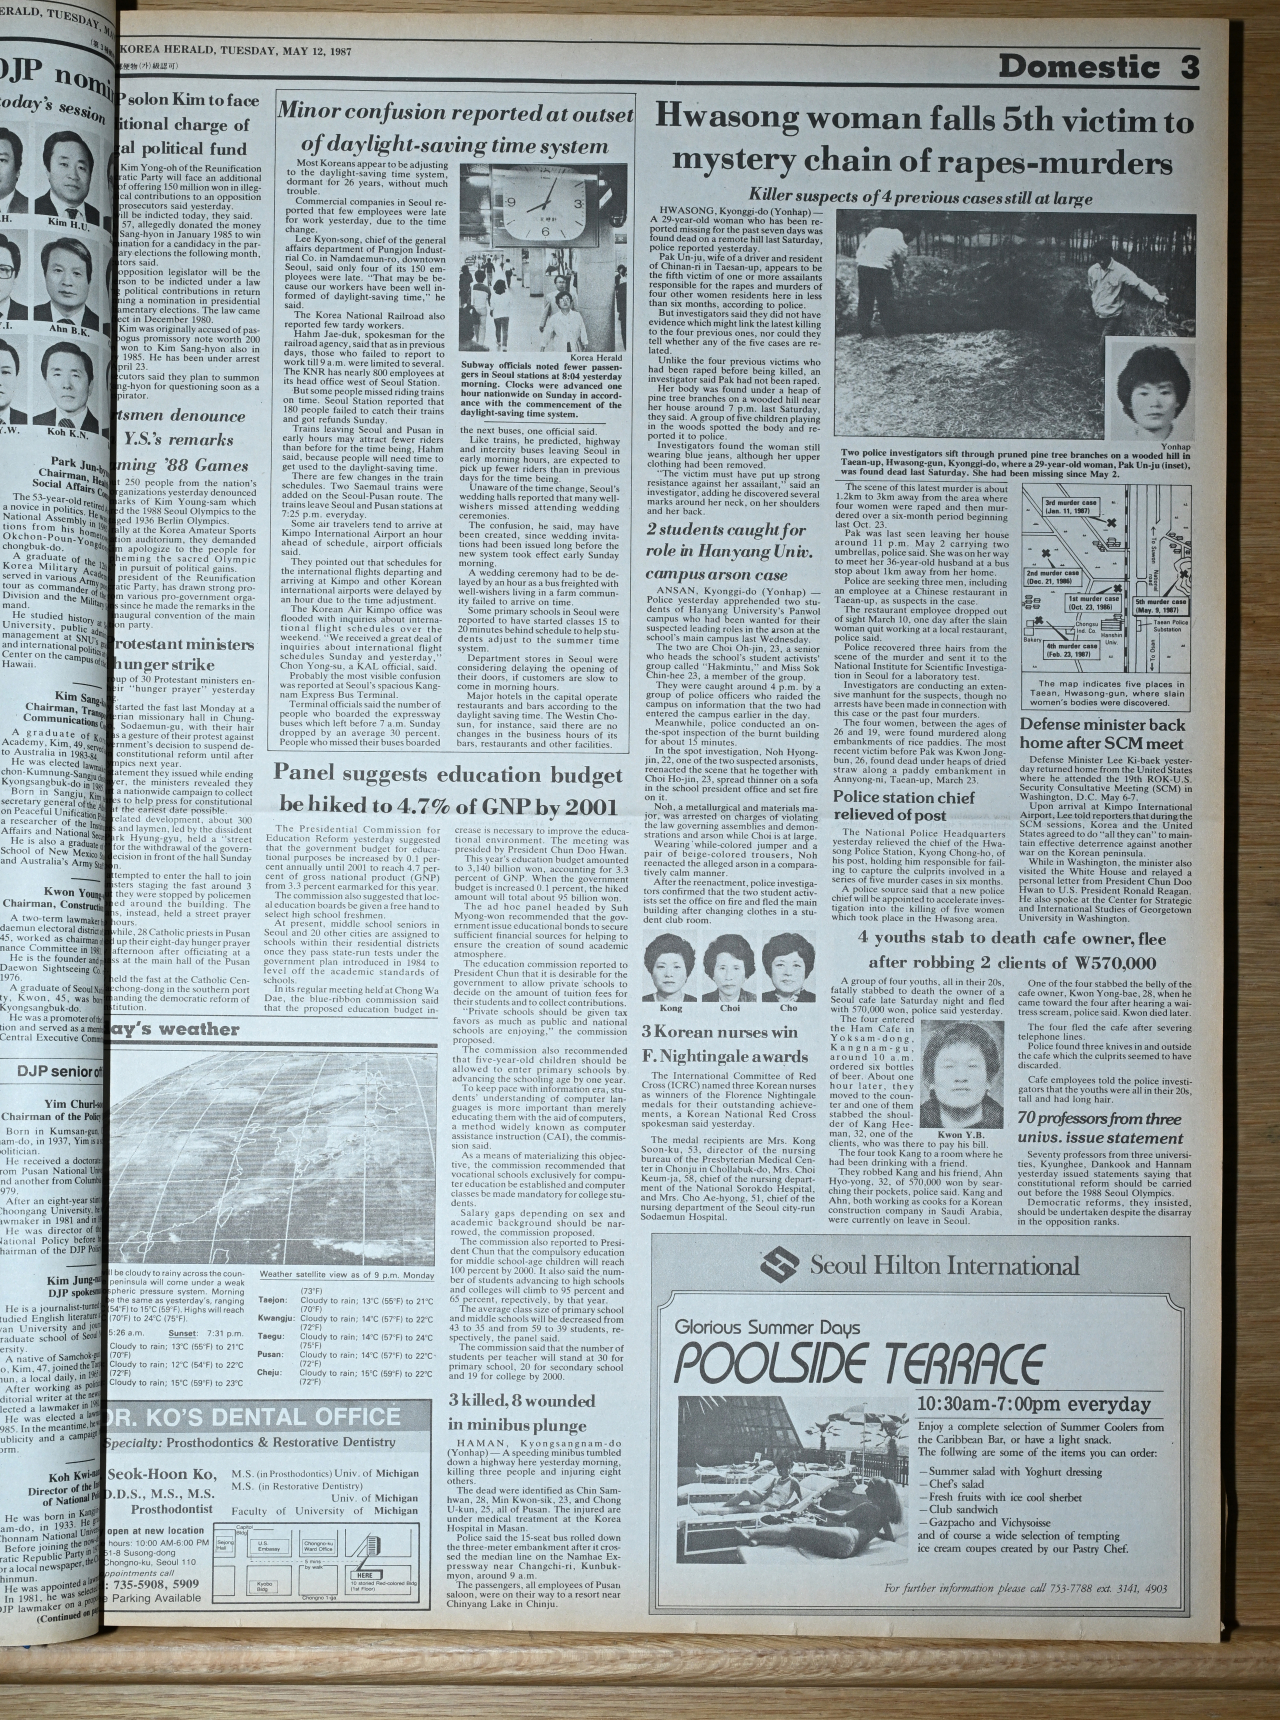 An article in the May 12, 1987 edition of The Korea Herald details how the police found a woman’s body in the woods in Hwaseong, Gyeonggi Province. She was presumed to be one of the victims of a serial killer operating in the area. (The Korea Herald)